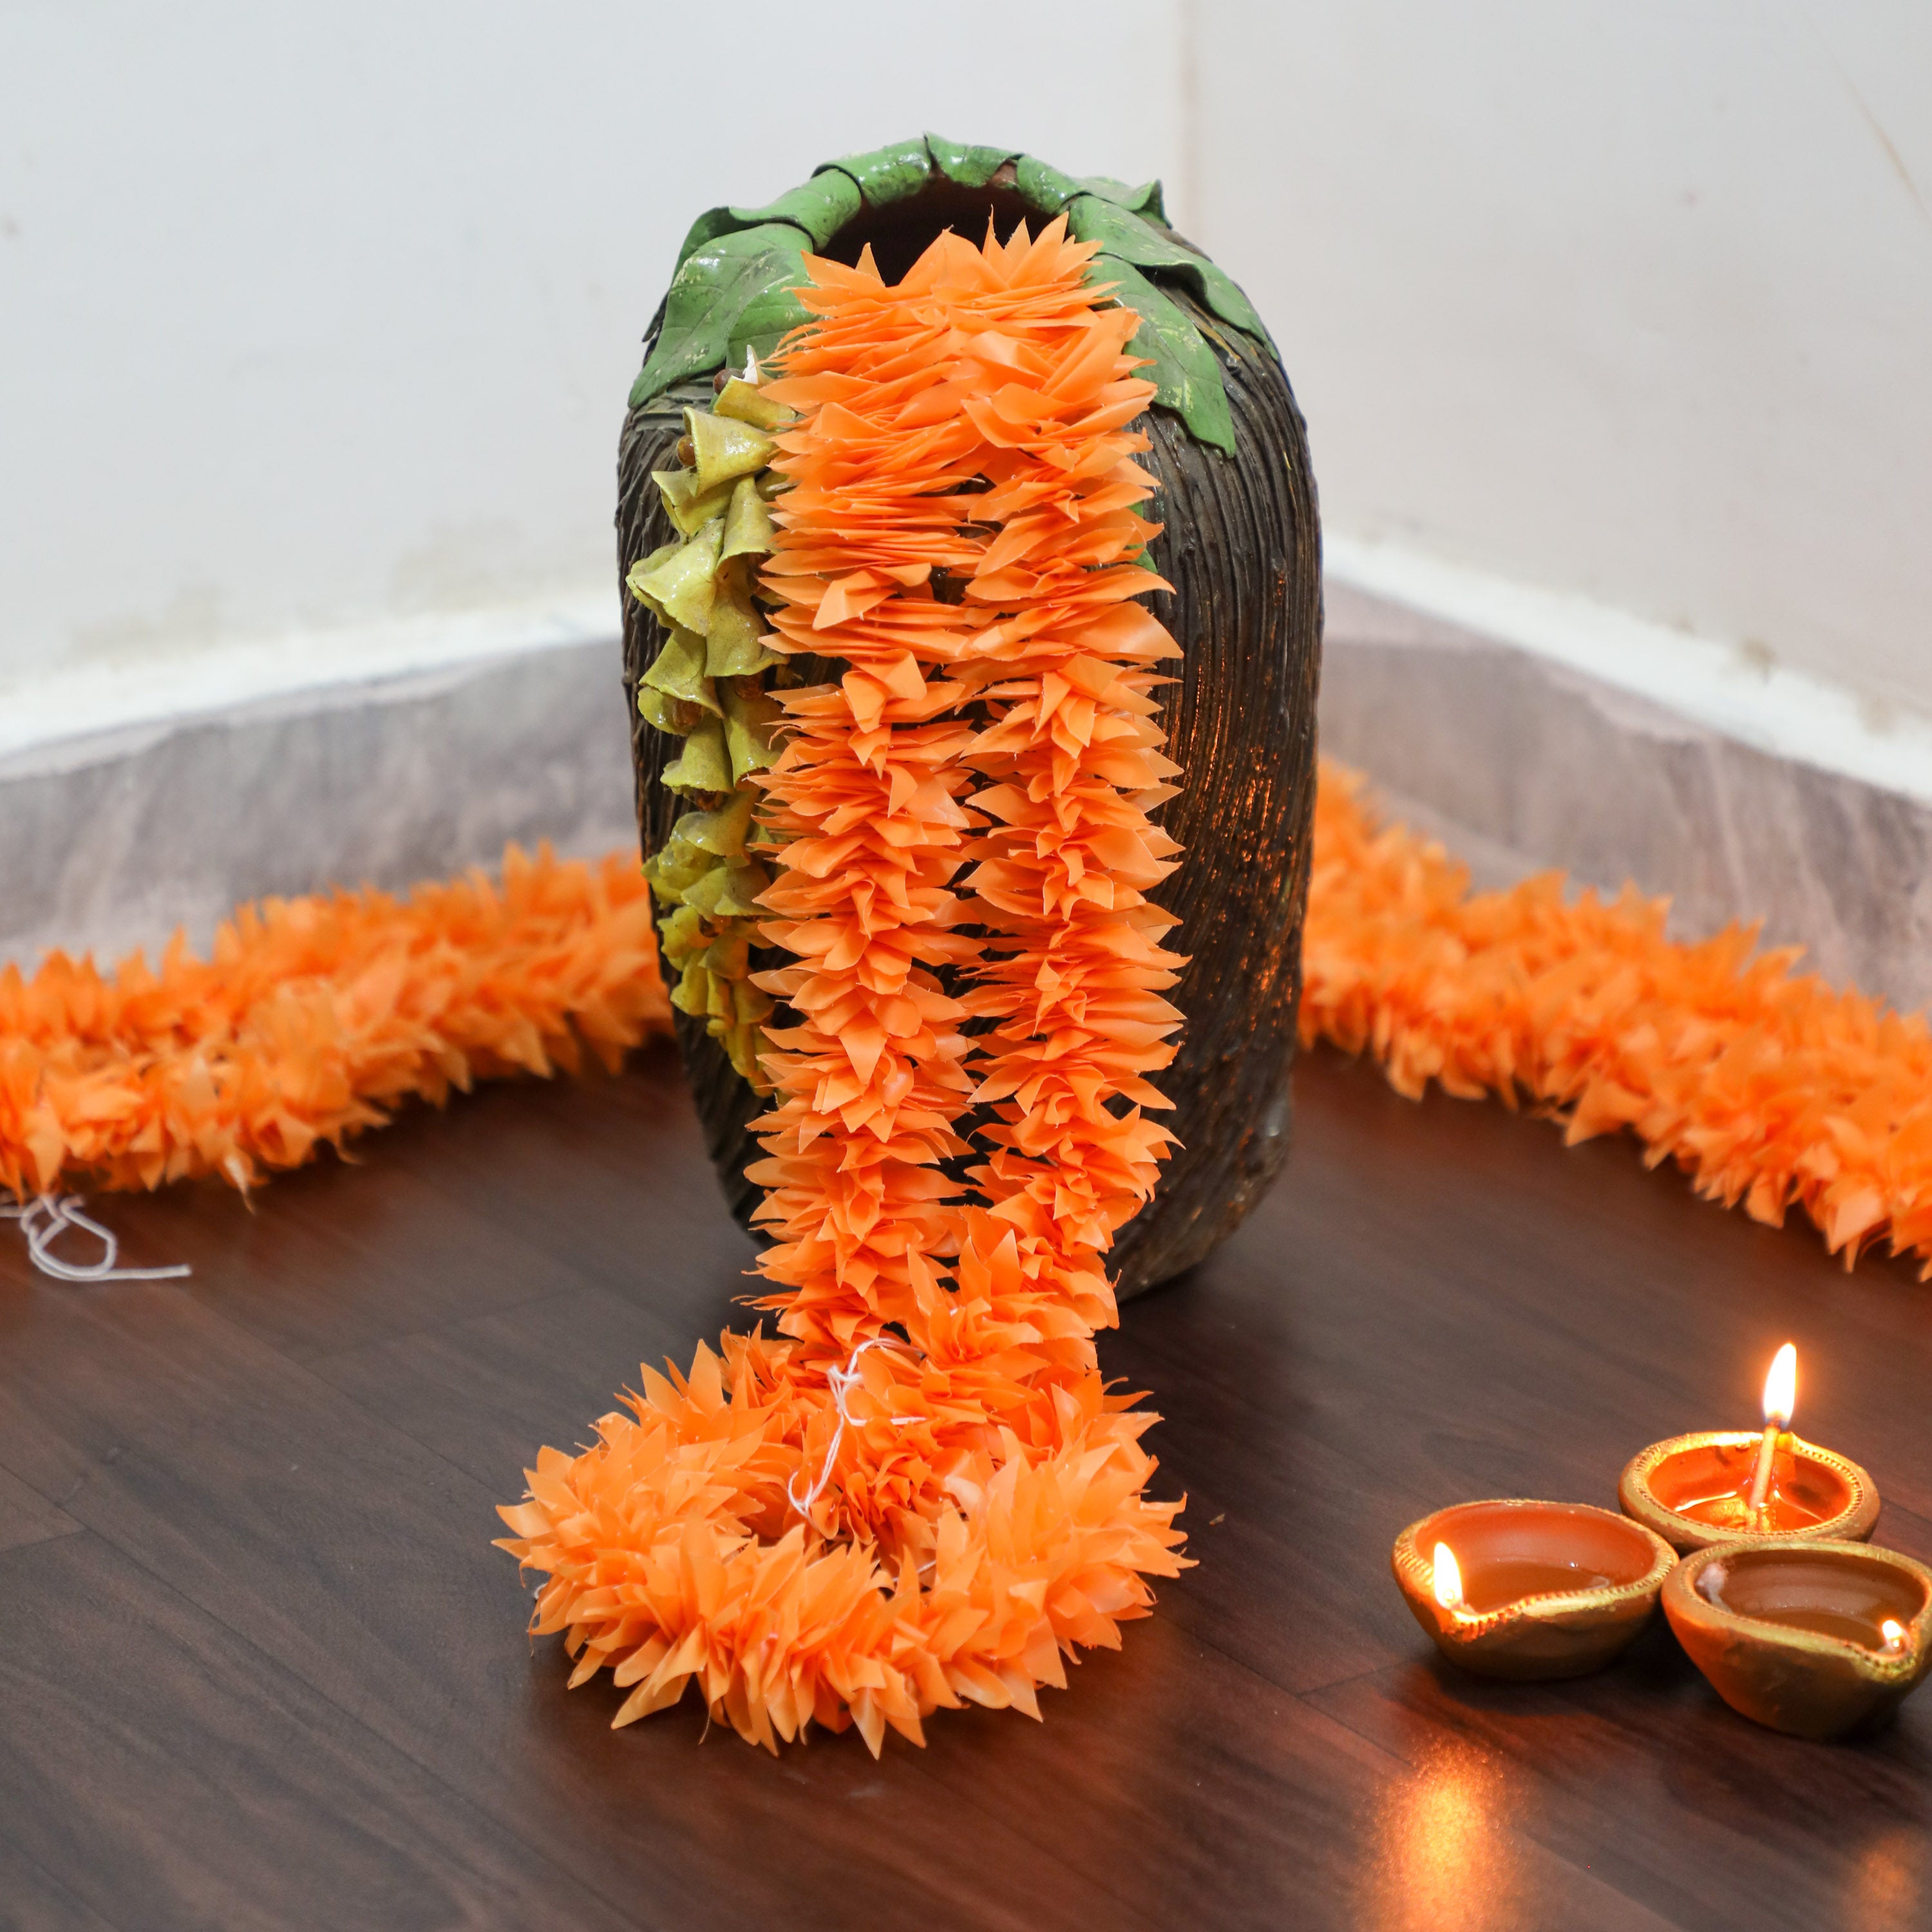 Floral decorations for Indian weddings